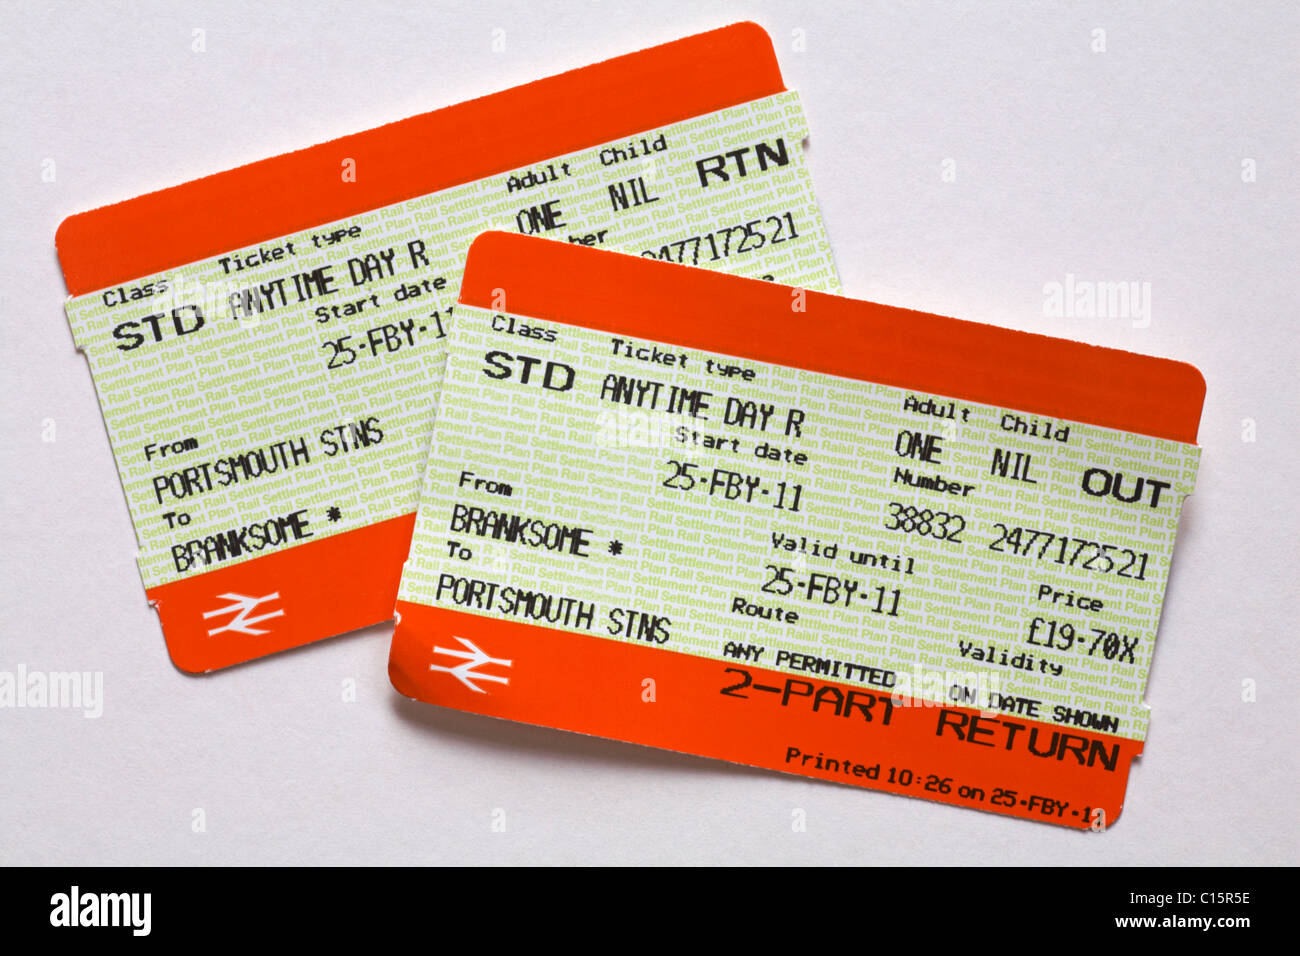 return train tickets for South West trains between Branksome and Portsmouth stations - outward ticket on top Stock Photo